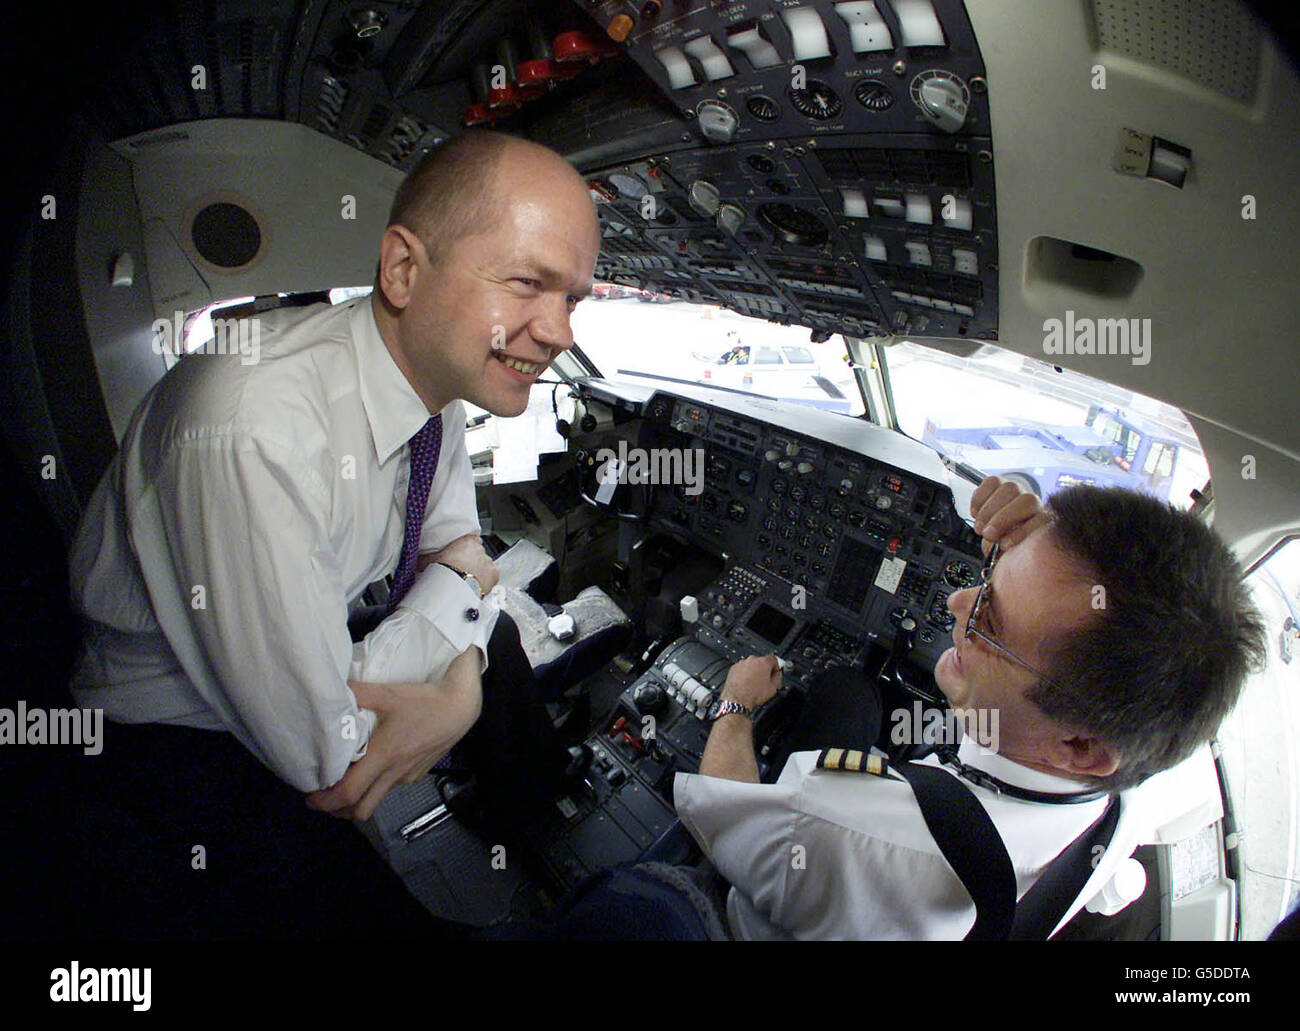 Conservative Party leader William Hague talks to First Officer Simon Stewart aboard his General Election campaign jet. In a keynote speech to an audience from the Asian community in Bradford Mr Hague sought to shake off the charge of racism. * ...that has dogged his party throughout the election campaign. He said: 'It has never mattered to me whether people are Muslim, Christian, Hindu, Sikh, Jewish, white, black or Asian. As far as I am concerned we are all as British as each other.' Mr Hague was speaking alongside the Tories' Muslim candidate for Bradford West, Mohammed Riaz. Stock Photo